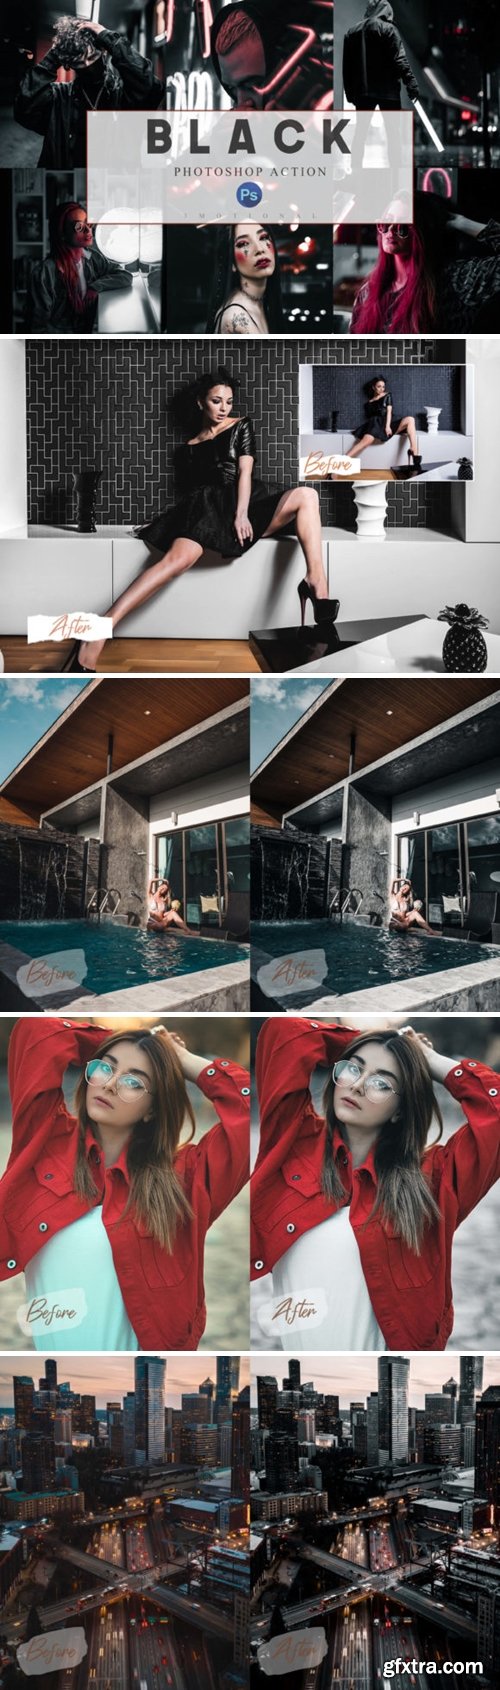 6 Photoshop Actions, ACR and LUT Preset 3884879